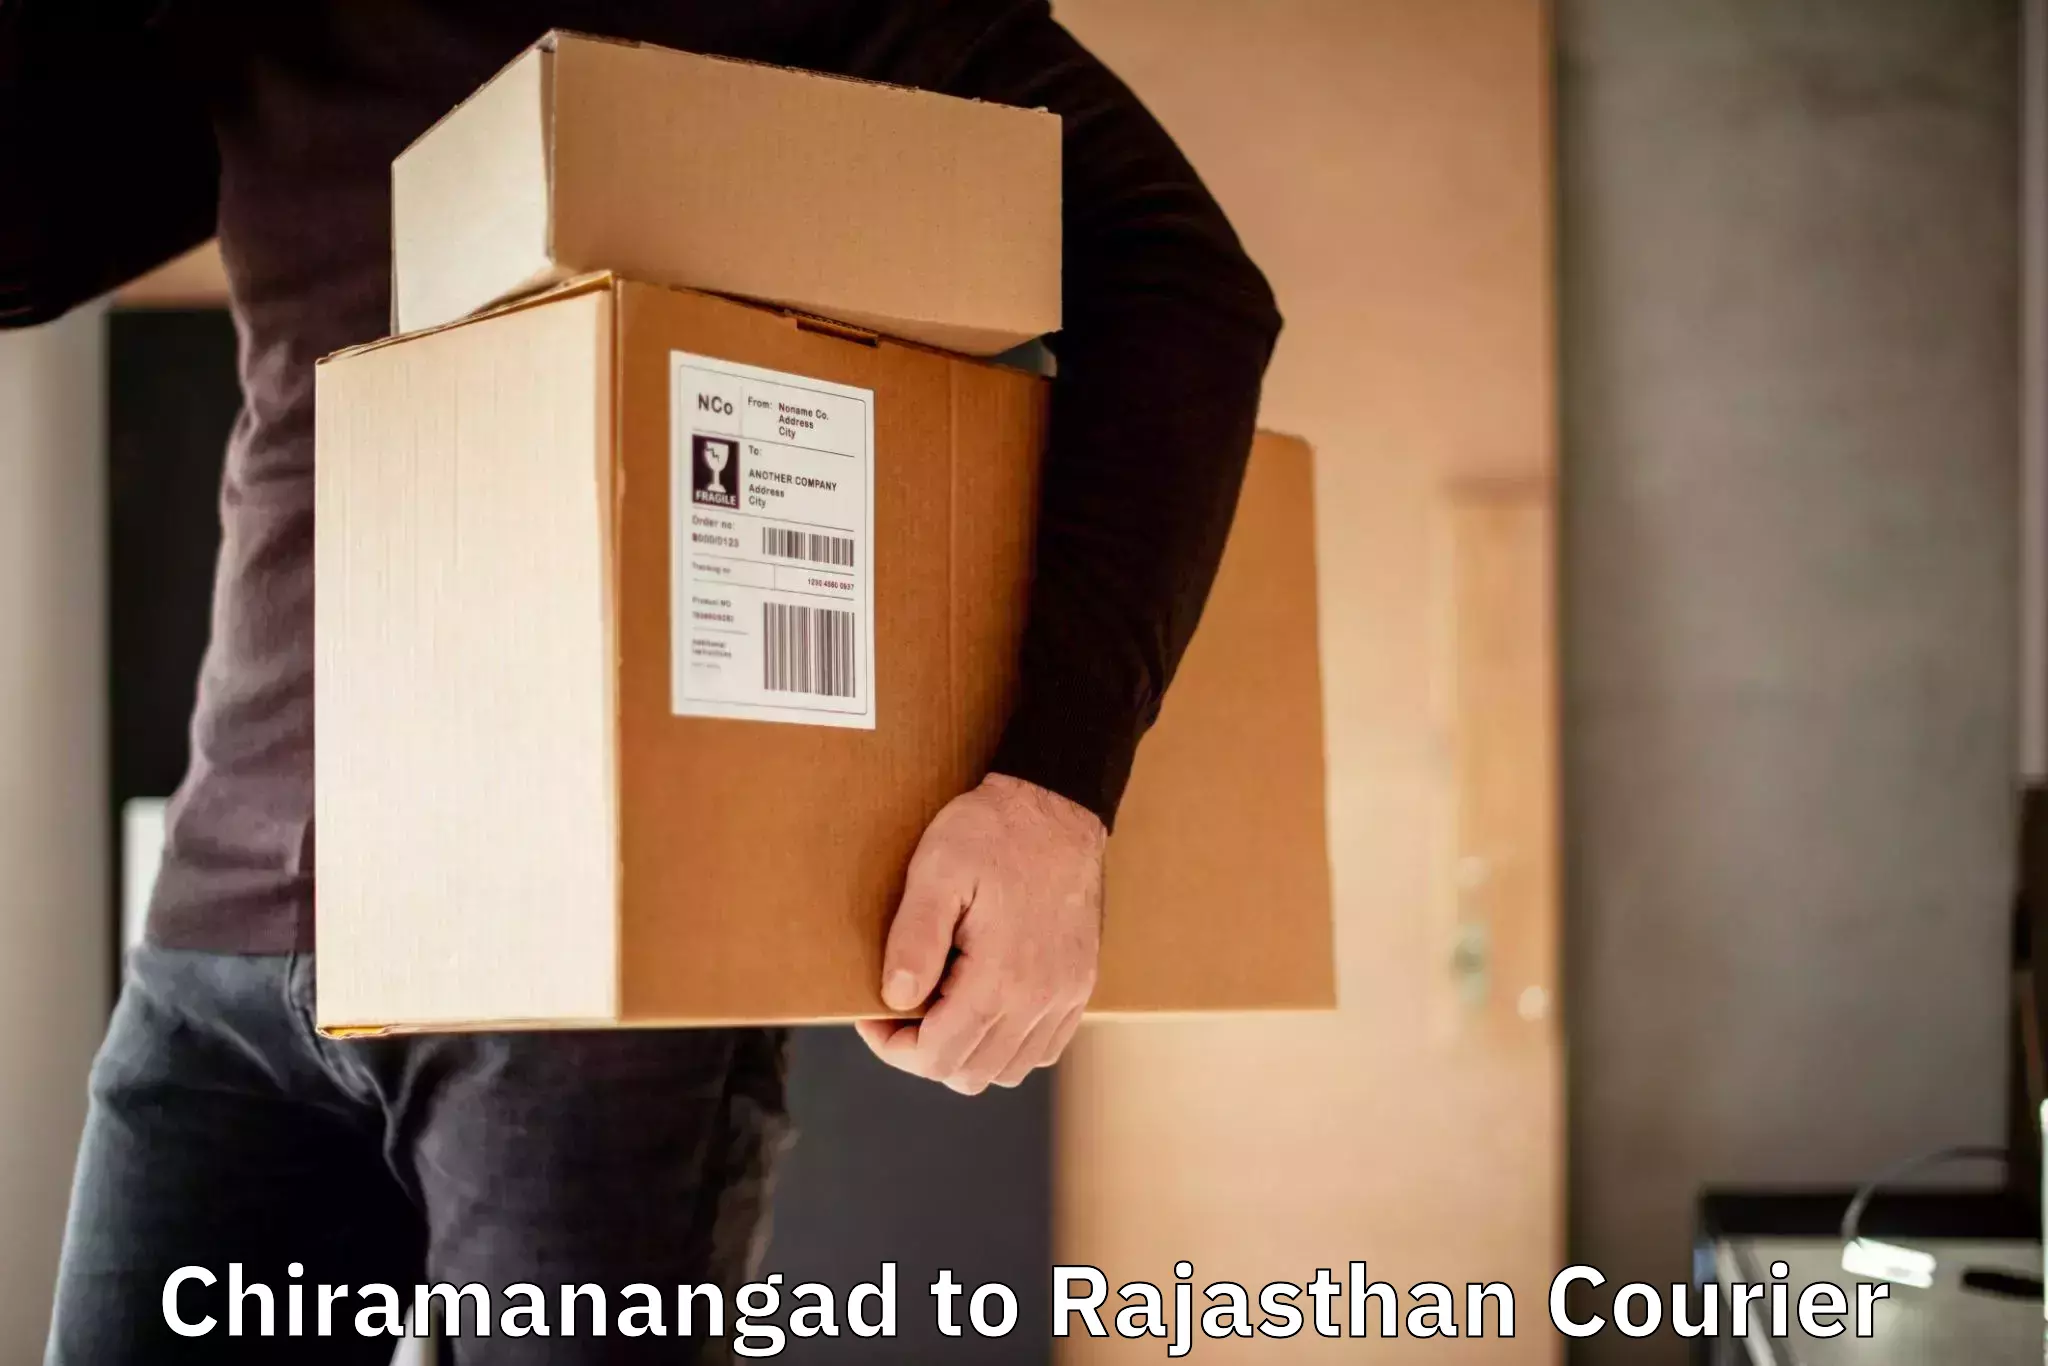 Optimized delivery routes Chiramanangad to Rajasthan